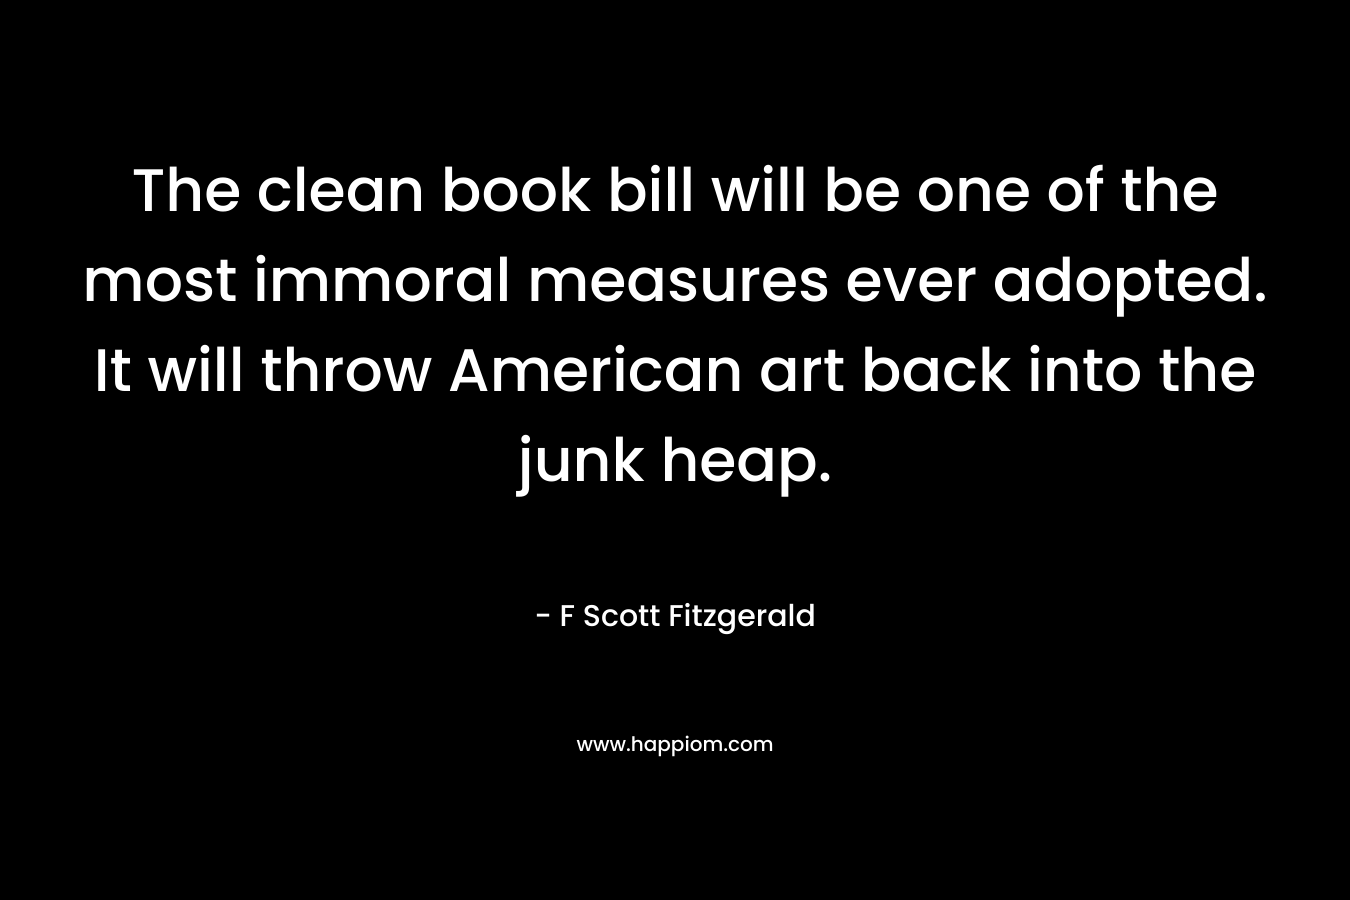 The clean book bill will be one of the most immoral measures ever adopted. It will throw American art back into the junk heap.